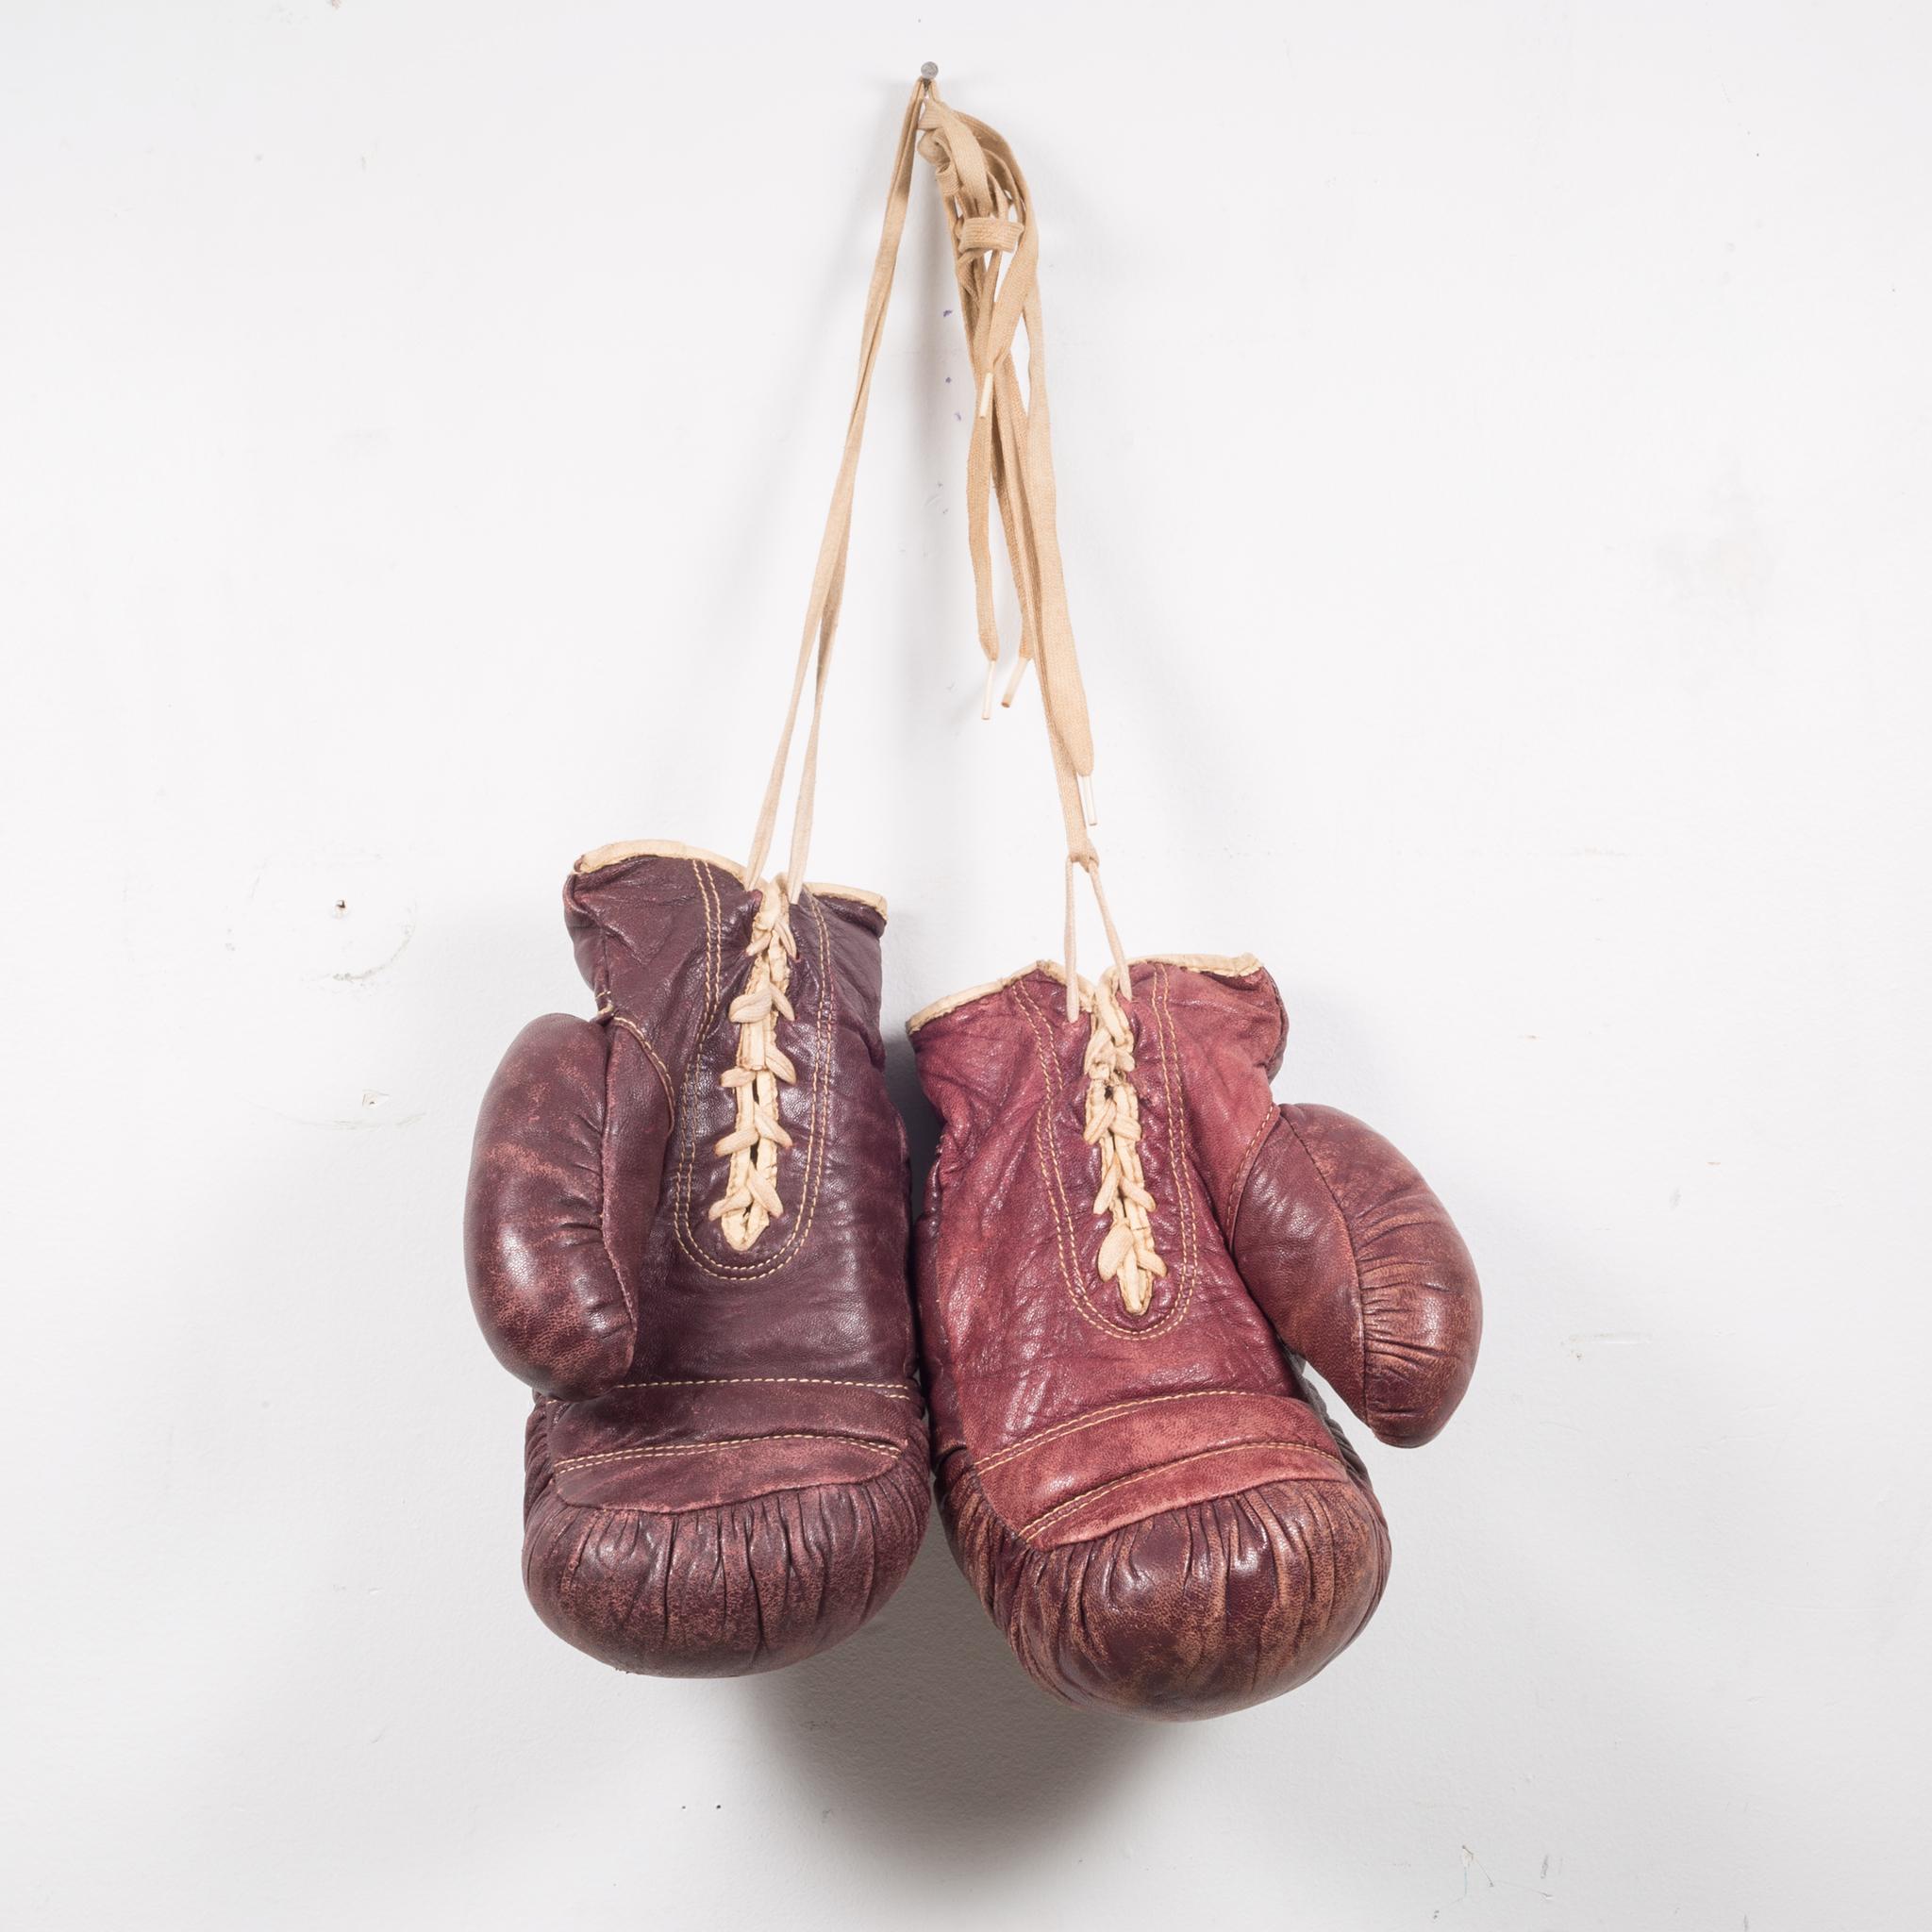 About

A pair of authentic vintage boxing gloves with reddish, brown leather. Each glove has tan leather piping and laces. The leather is very soft and is good condition. Stamped 